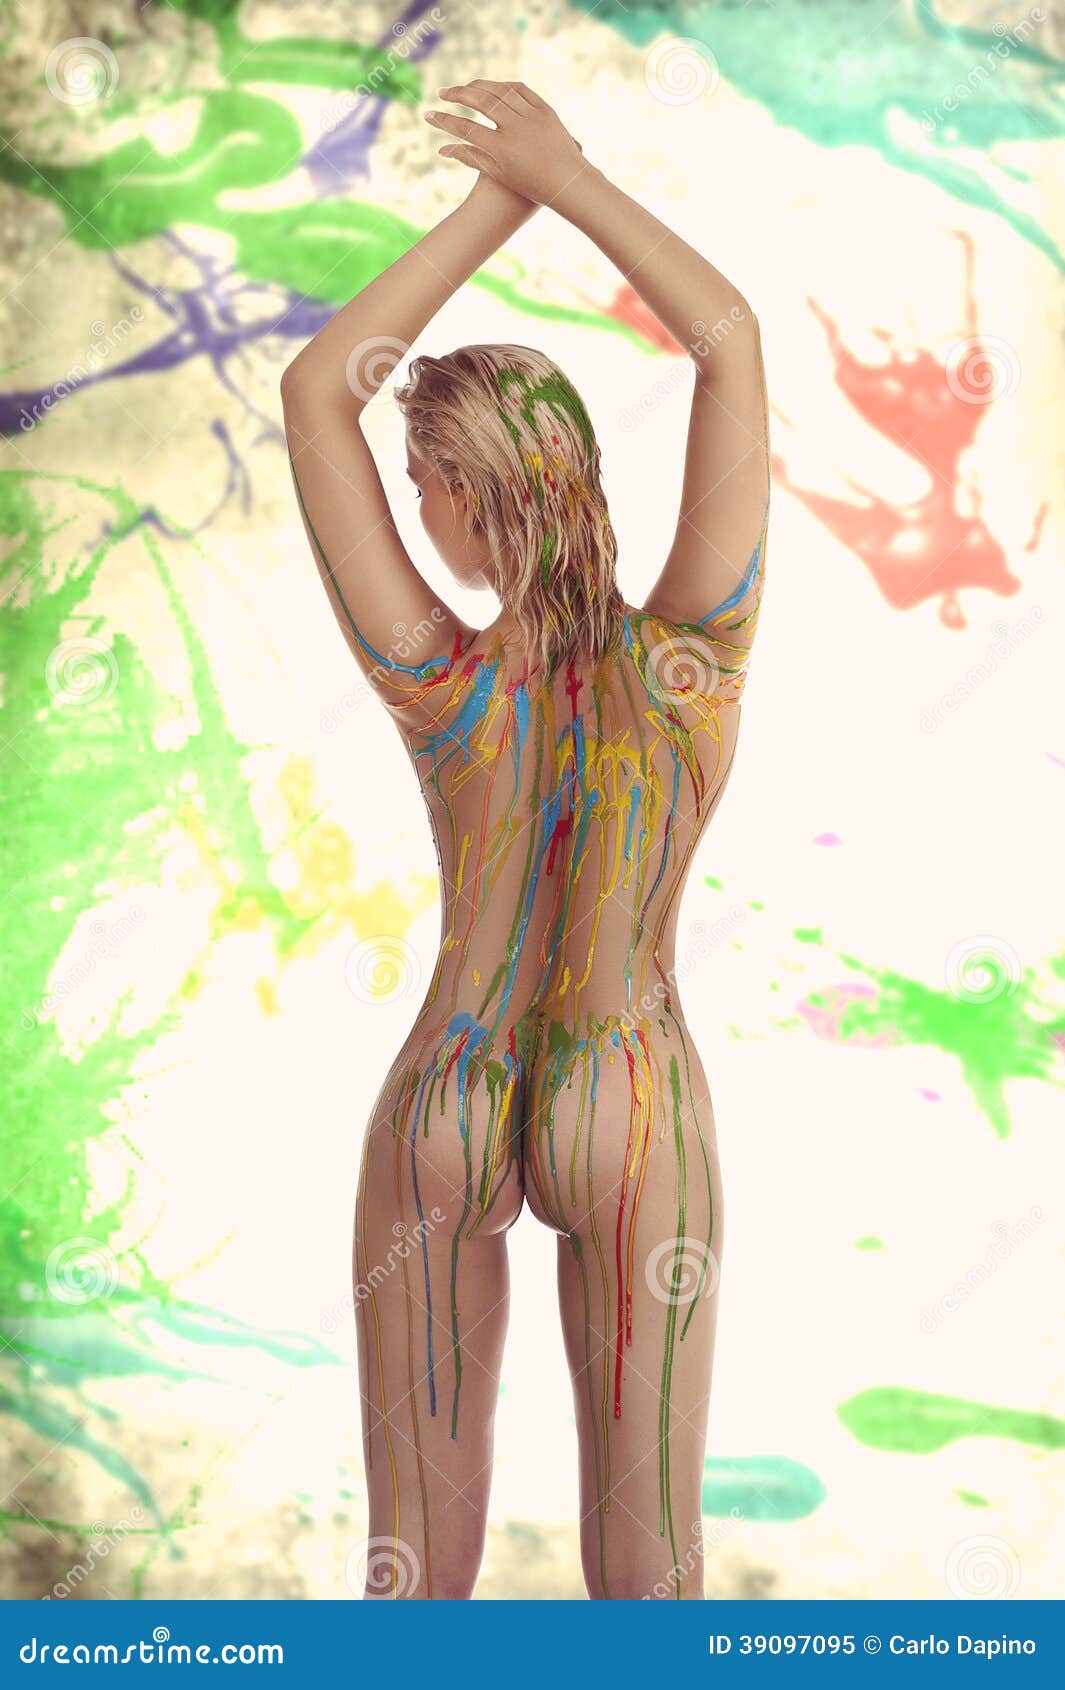 brandon starkey recommends nude body painting photos pic